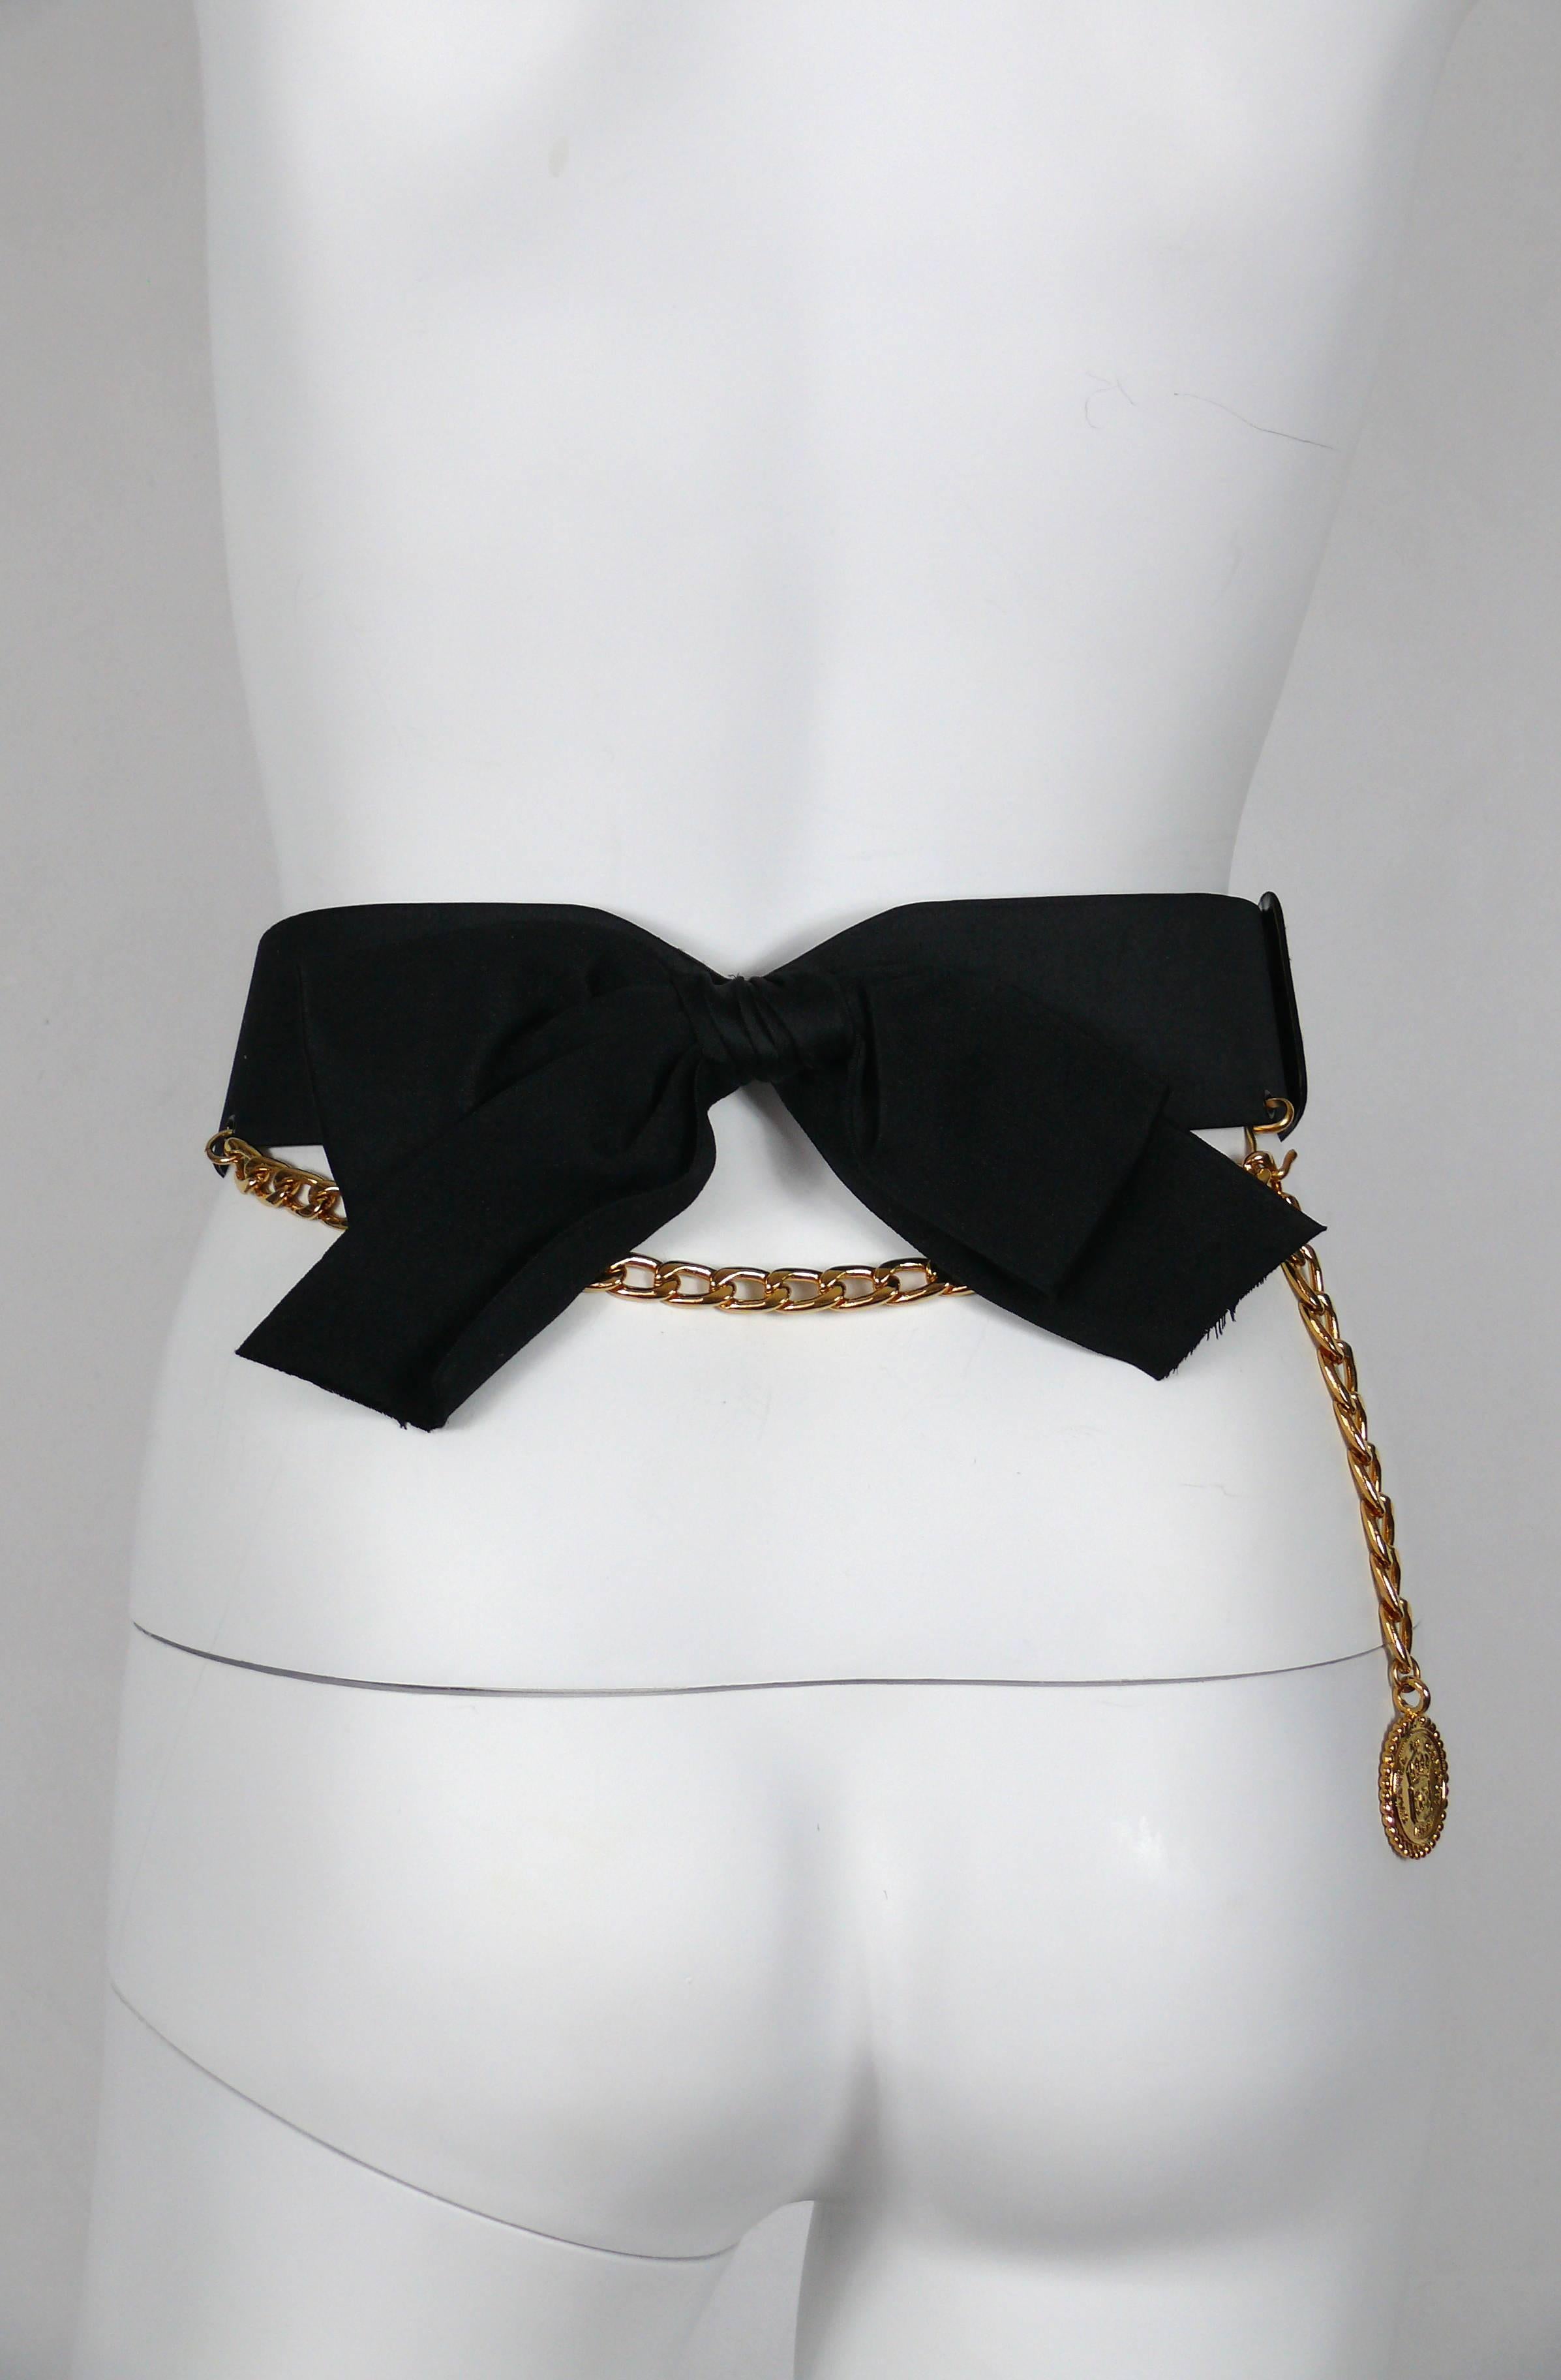 CHANEL black silk belt featuring a large bow detail, a gold tone link chain and a "Chanel Rue Cabon Paris" medallion ornament.

Rectangular rigid chain buckle.

Black leather lining.

Indicated size : 85/34.

Marked CHANEL Paris Made in